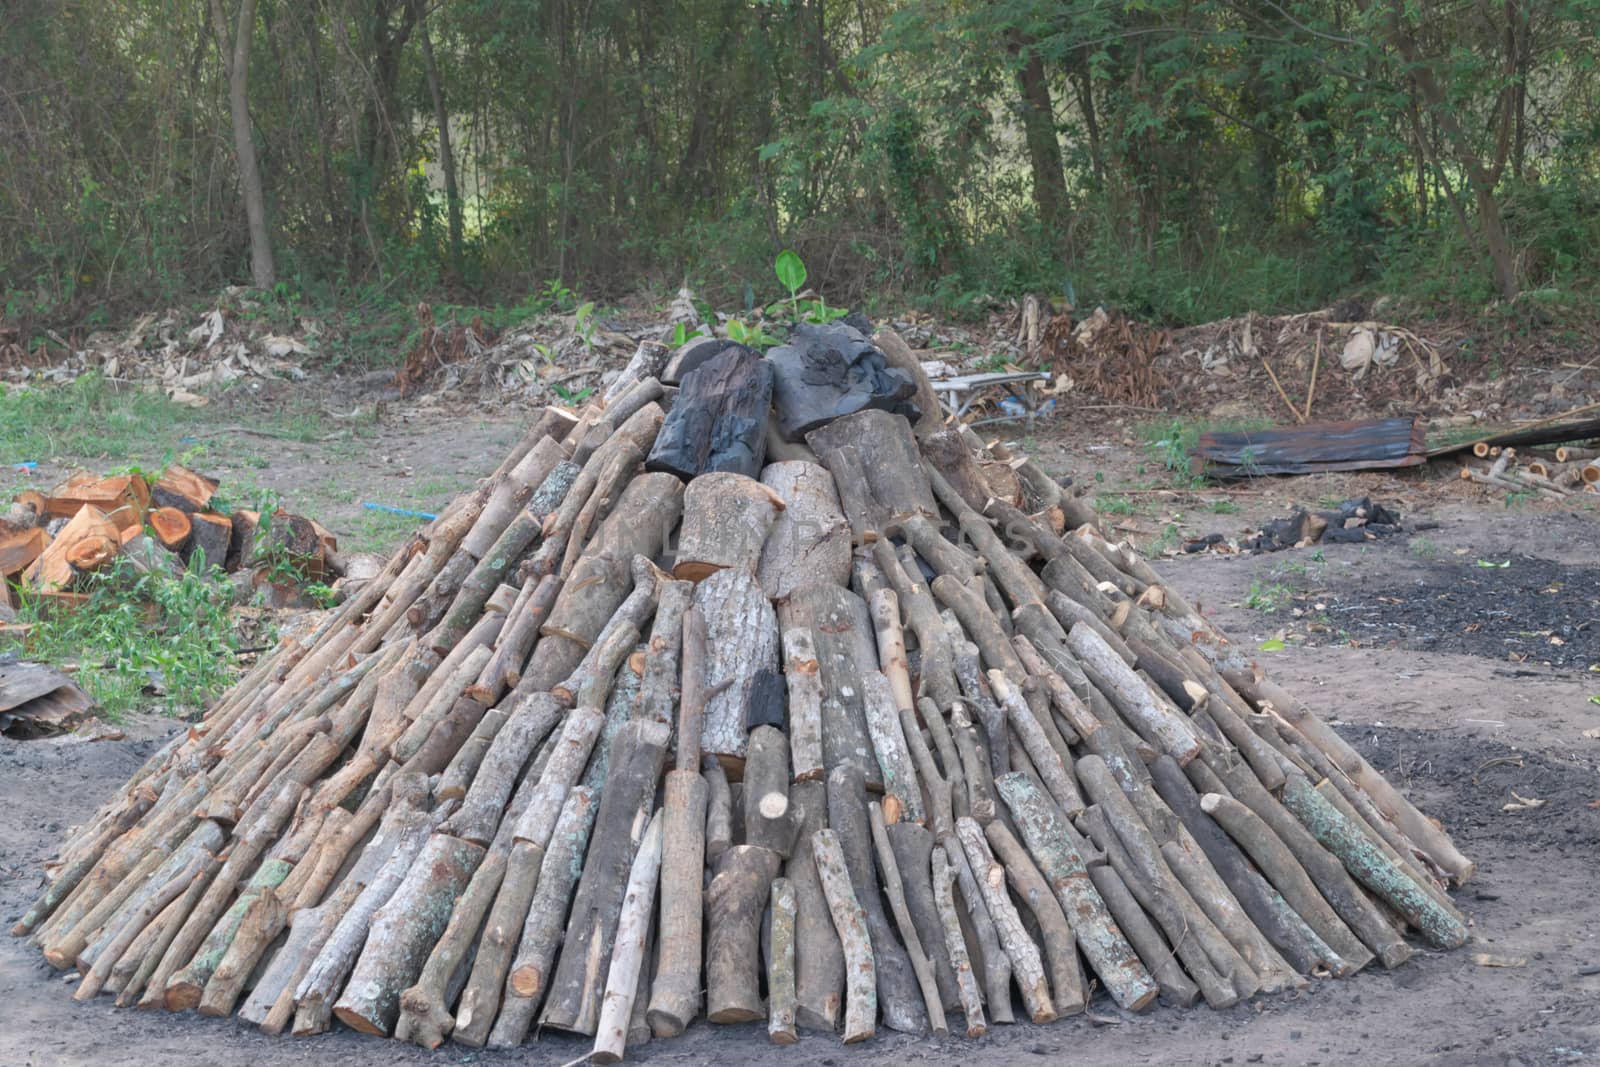 Close up view of a stack of firewood for the winter, stacks of f by Banglade